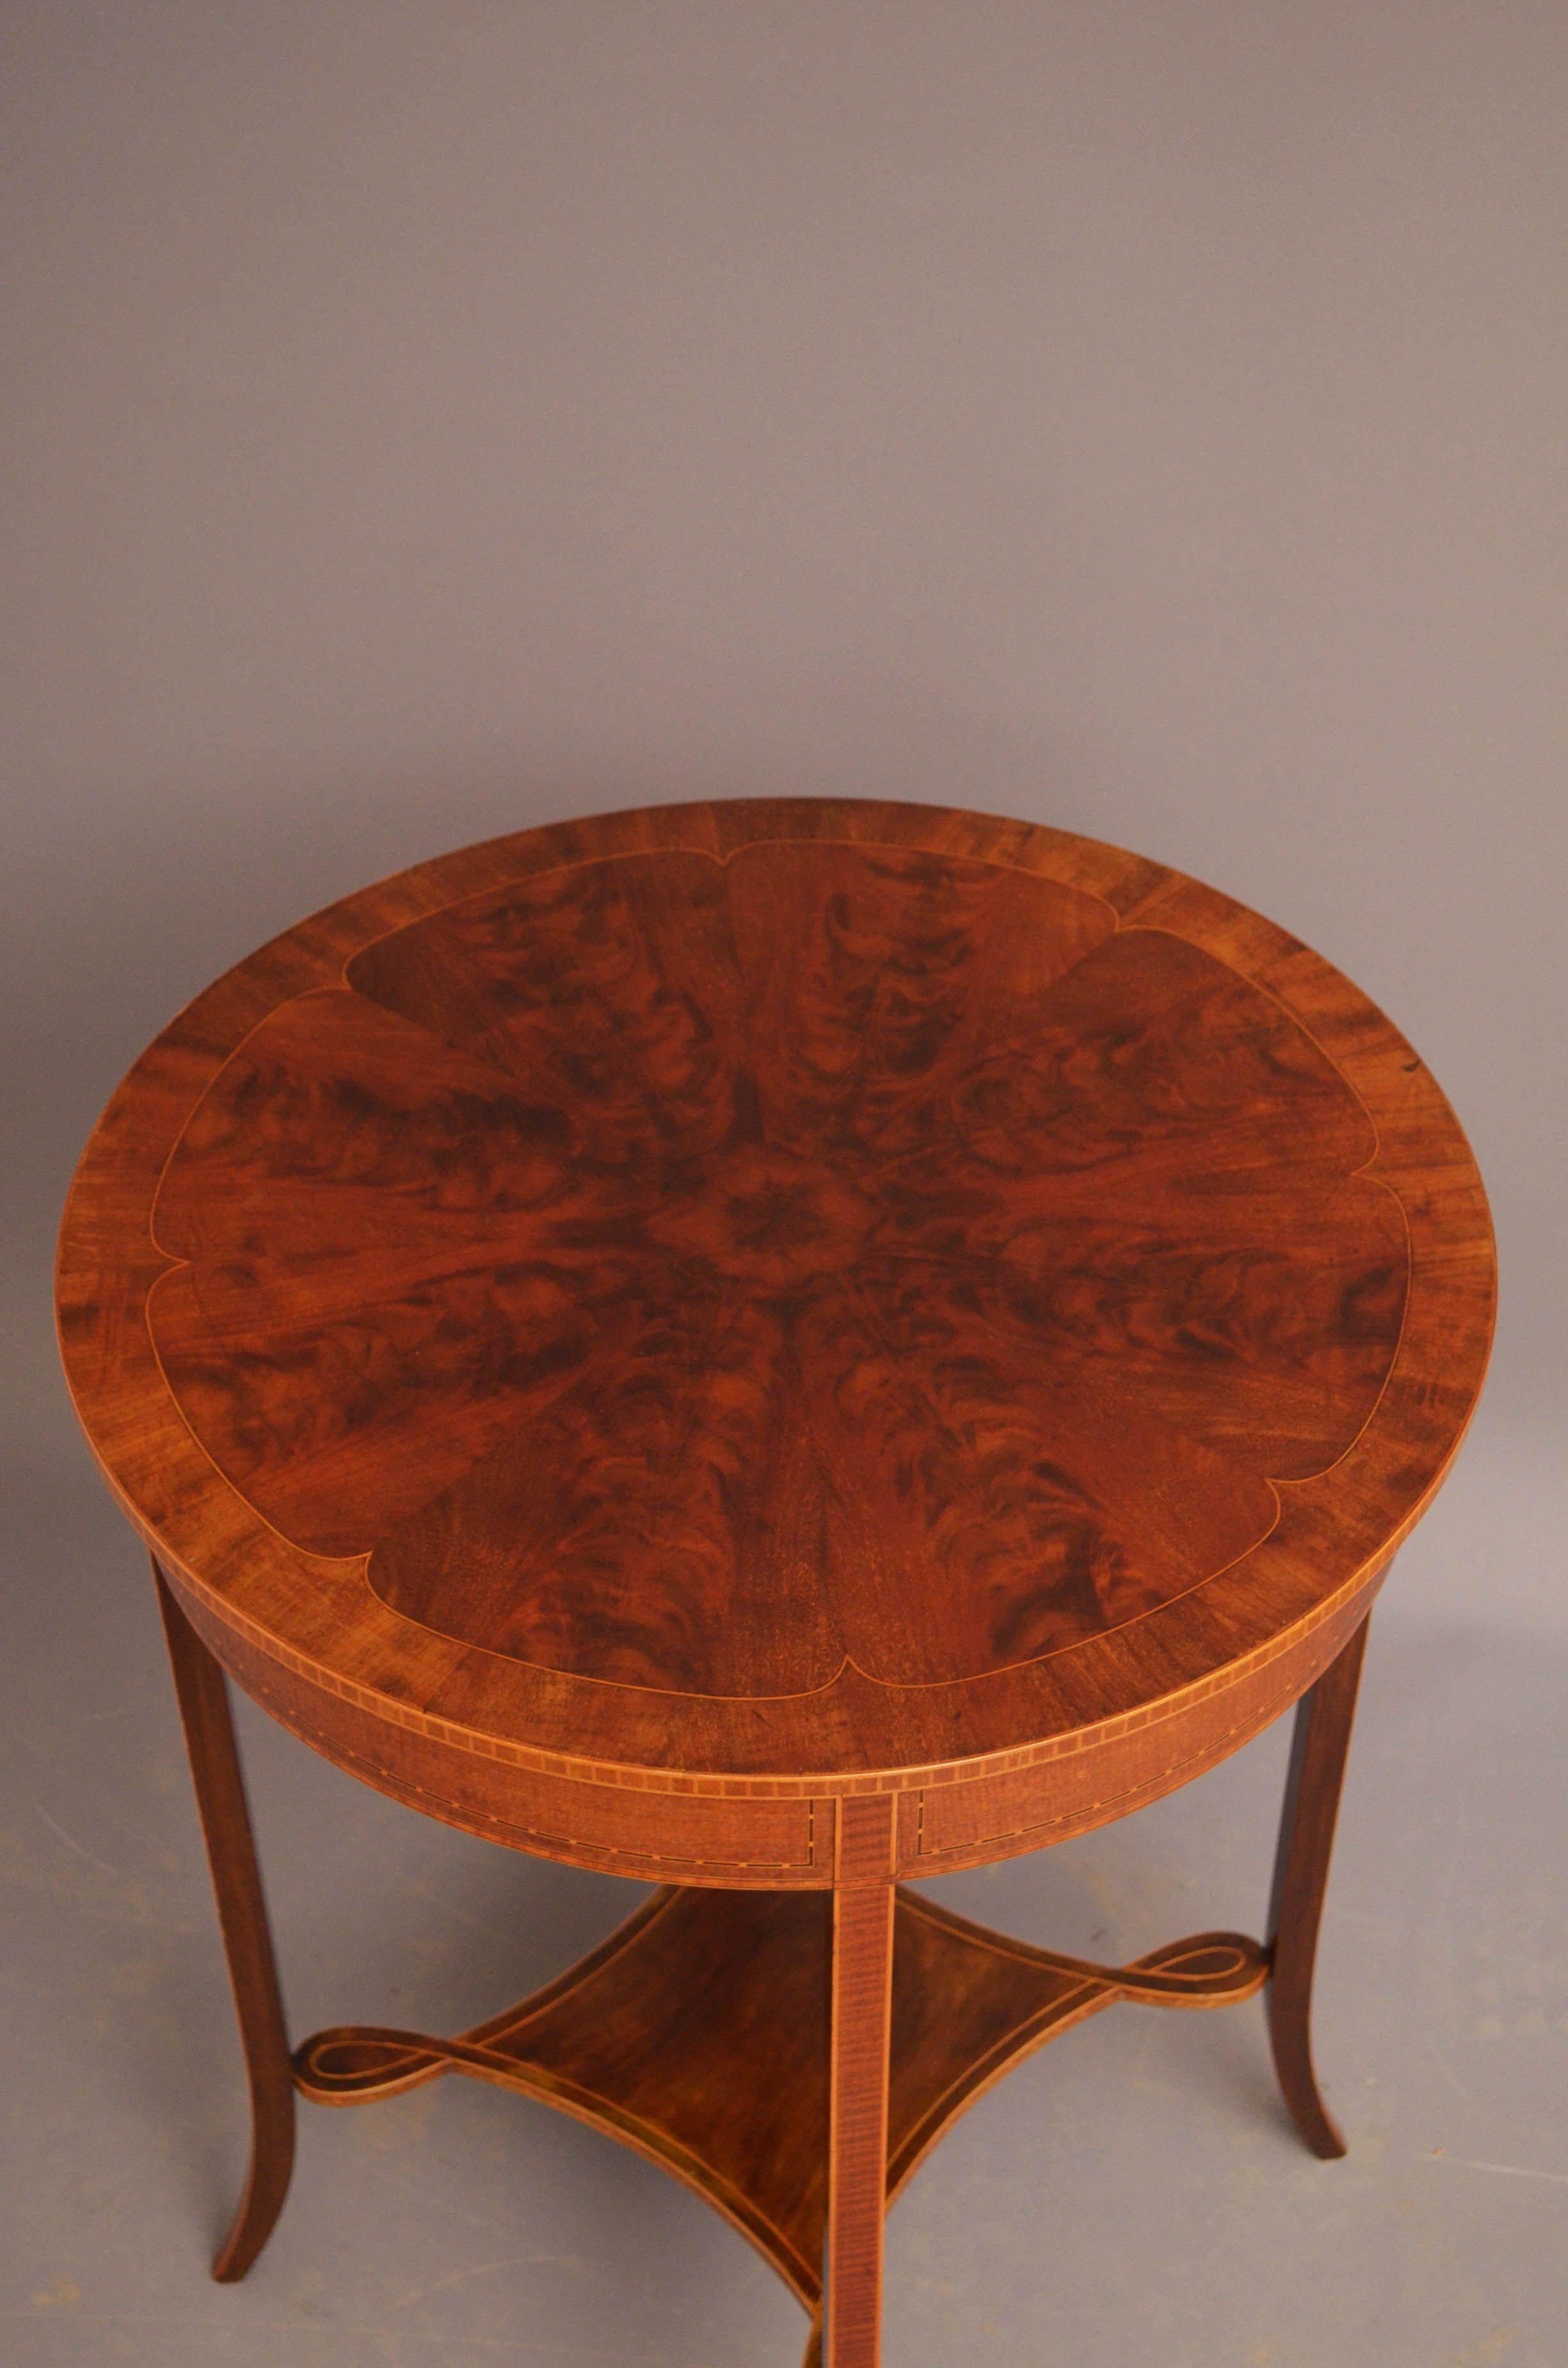 St07 Fine quality Edwardian occasional table in mahogany, having stunning segmented, flamed mahogany top with satinwood stringing, mahogany banding and inlaid edge above inlaid frieze and four outswept inlaid legs united by shaped and inlaid